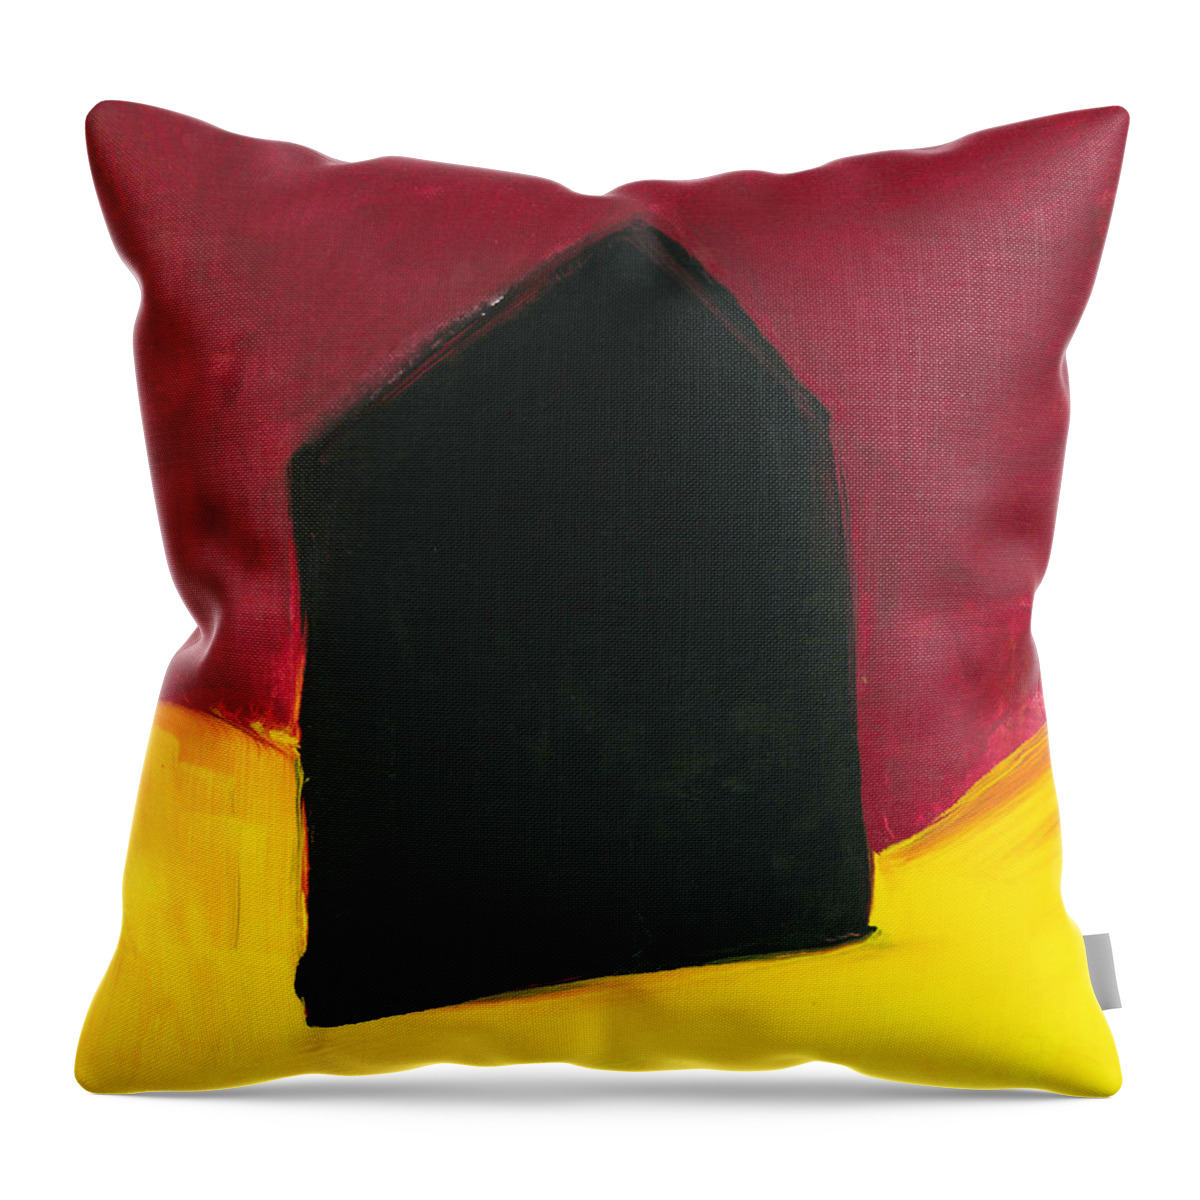 Landscape Throw Pillow featuring the painting Black ArtHouse by Carrie MaKenna